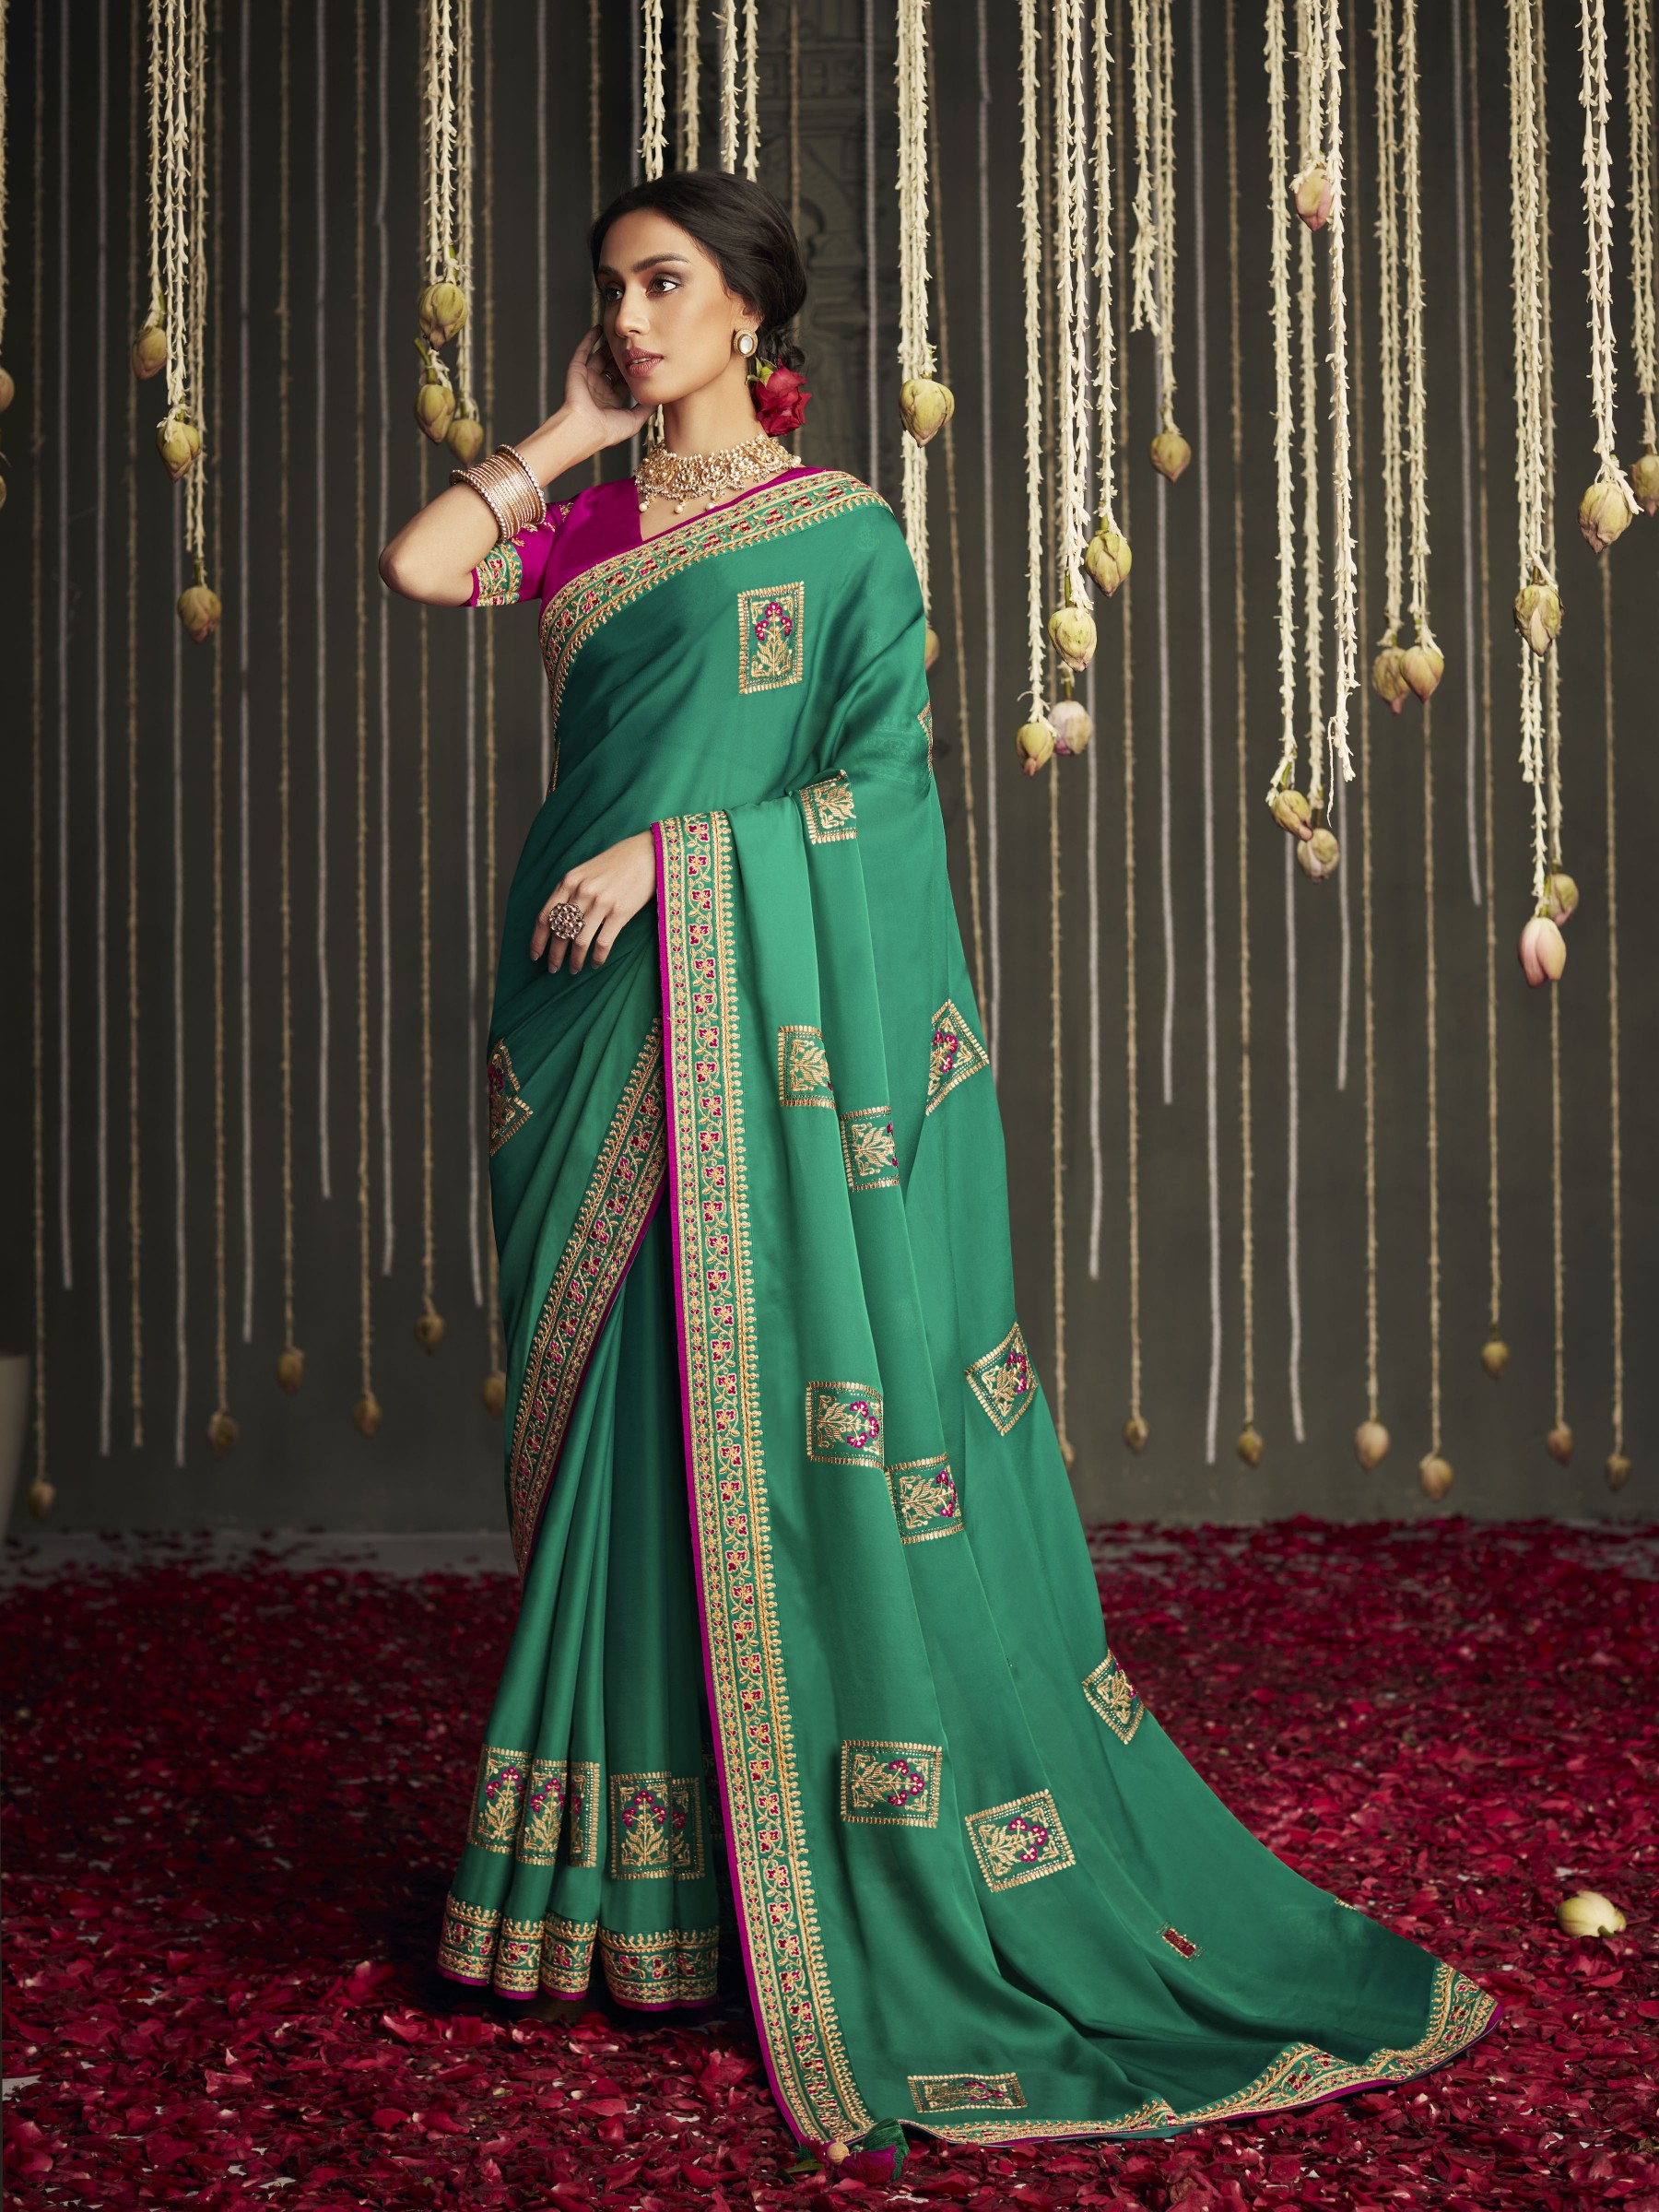 Fansy Silk Saree In Turquoise Color With Embroidery Work